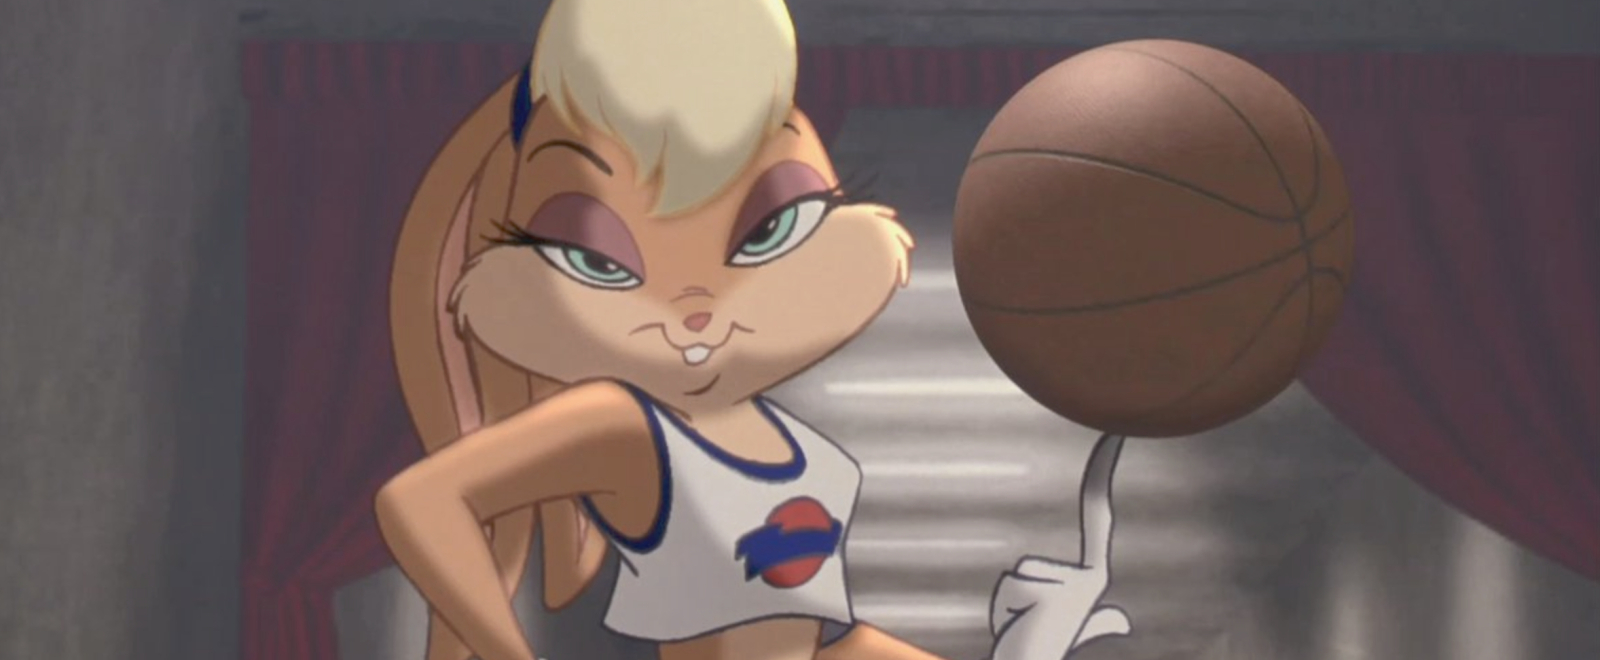 The ‘Space Jam: A New Legacy’ Director Says That Lola Bunny Will Be Less ‘Sexualized’ Than She Was In The Original